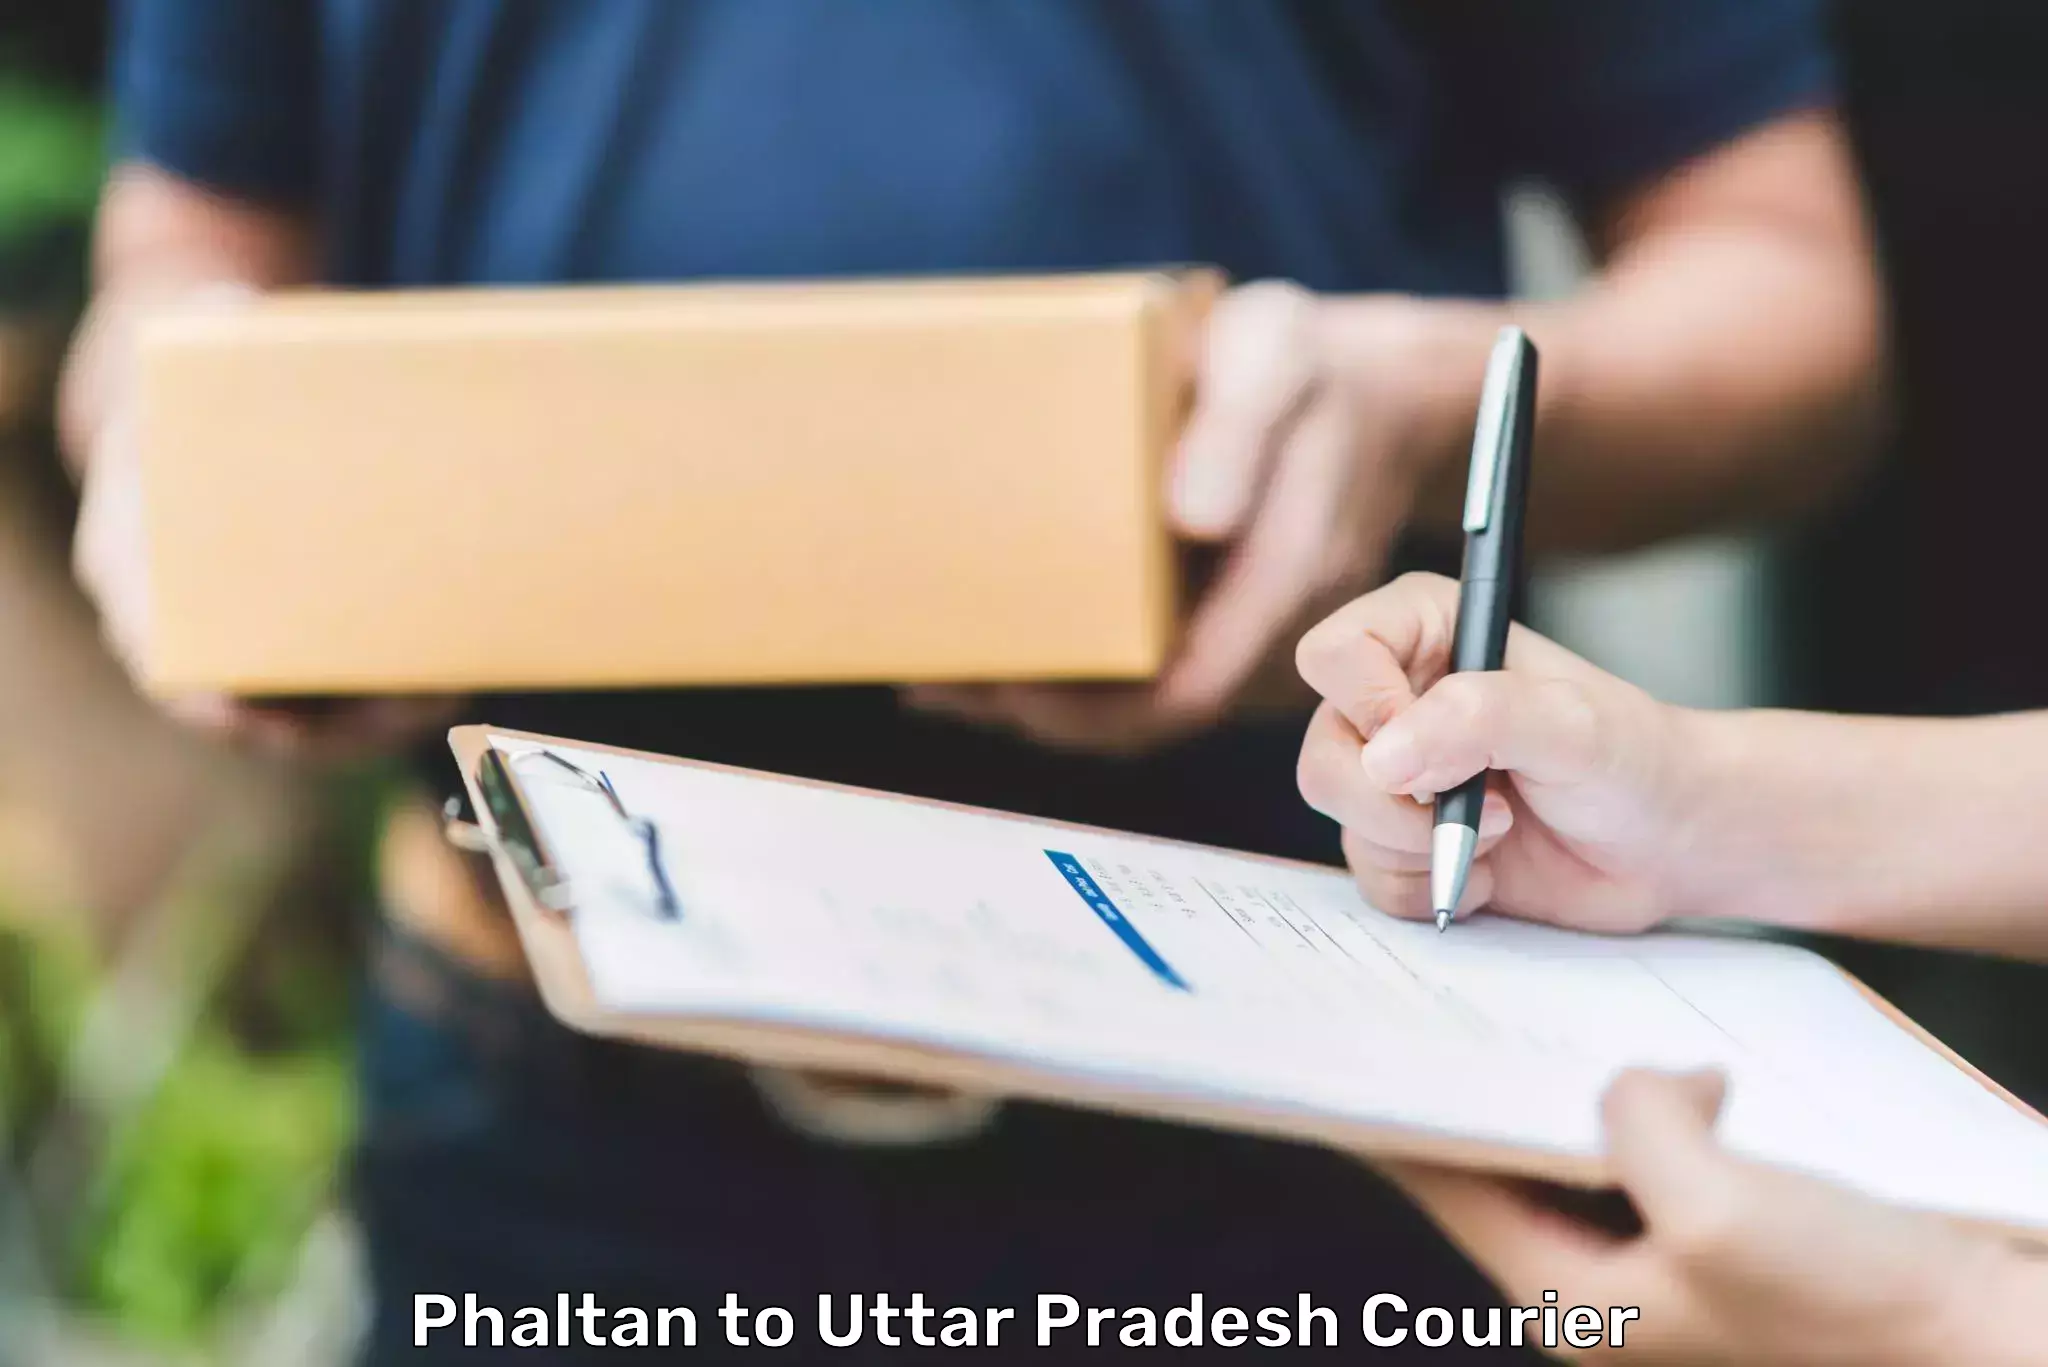 Expedited shipping methods Phaltan to Allahabad